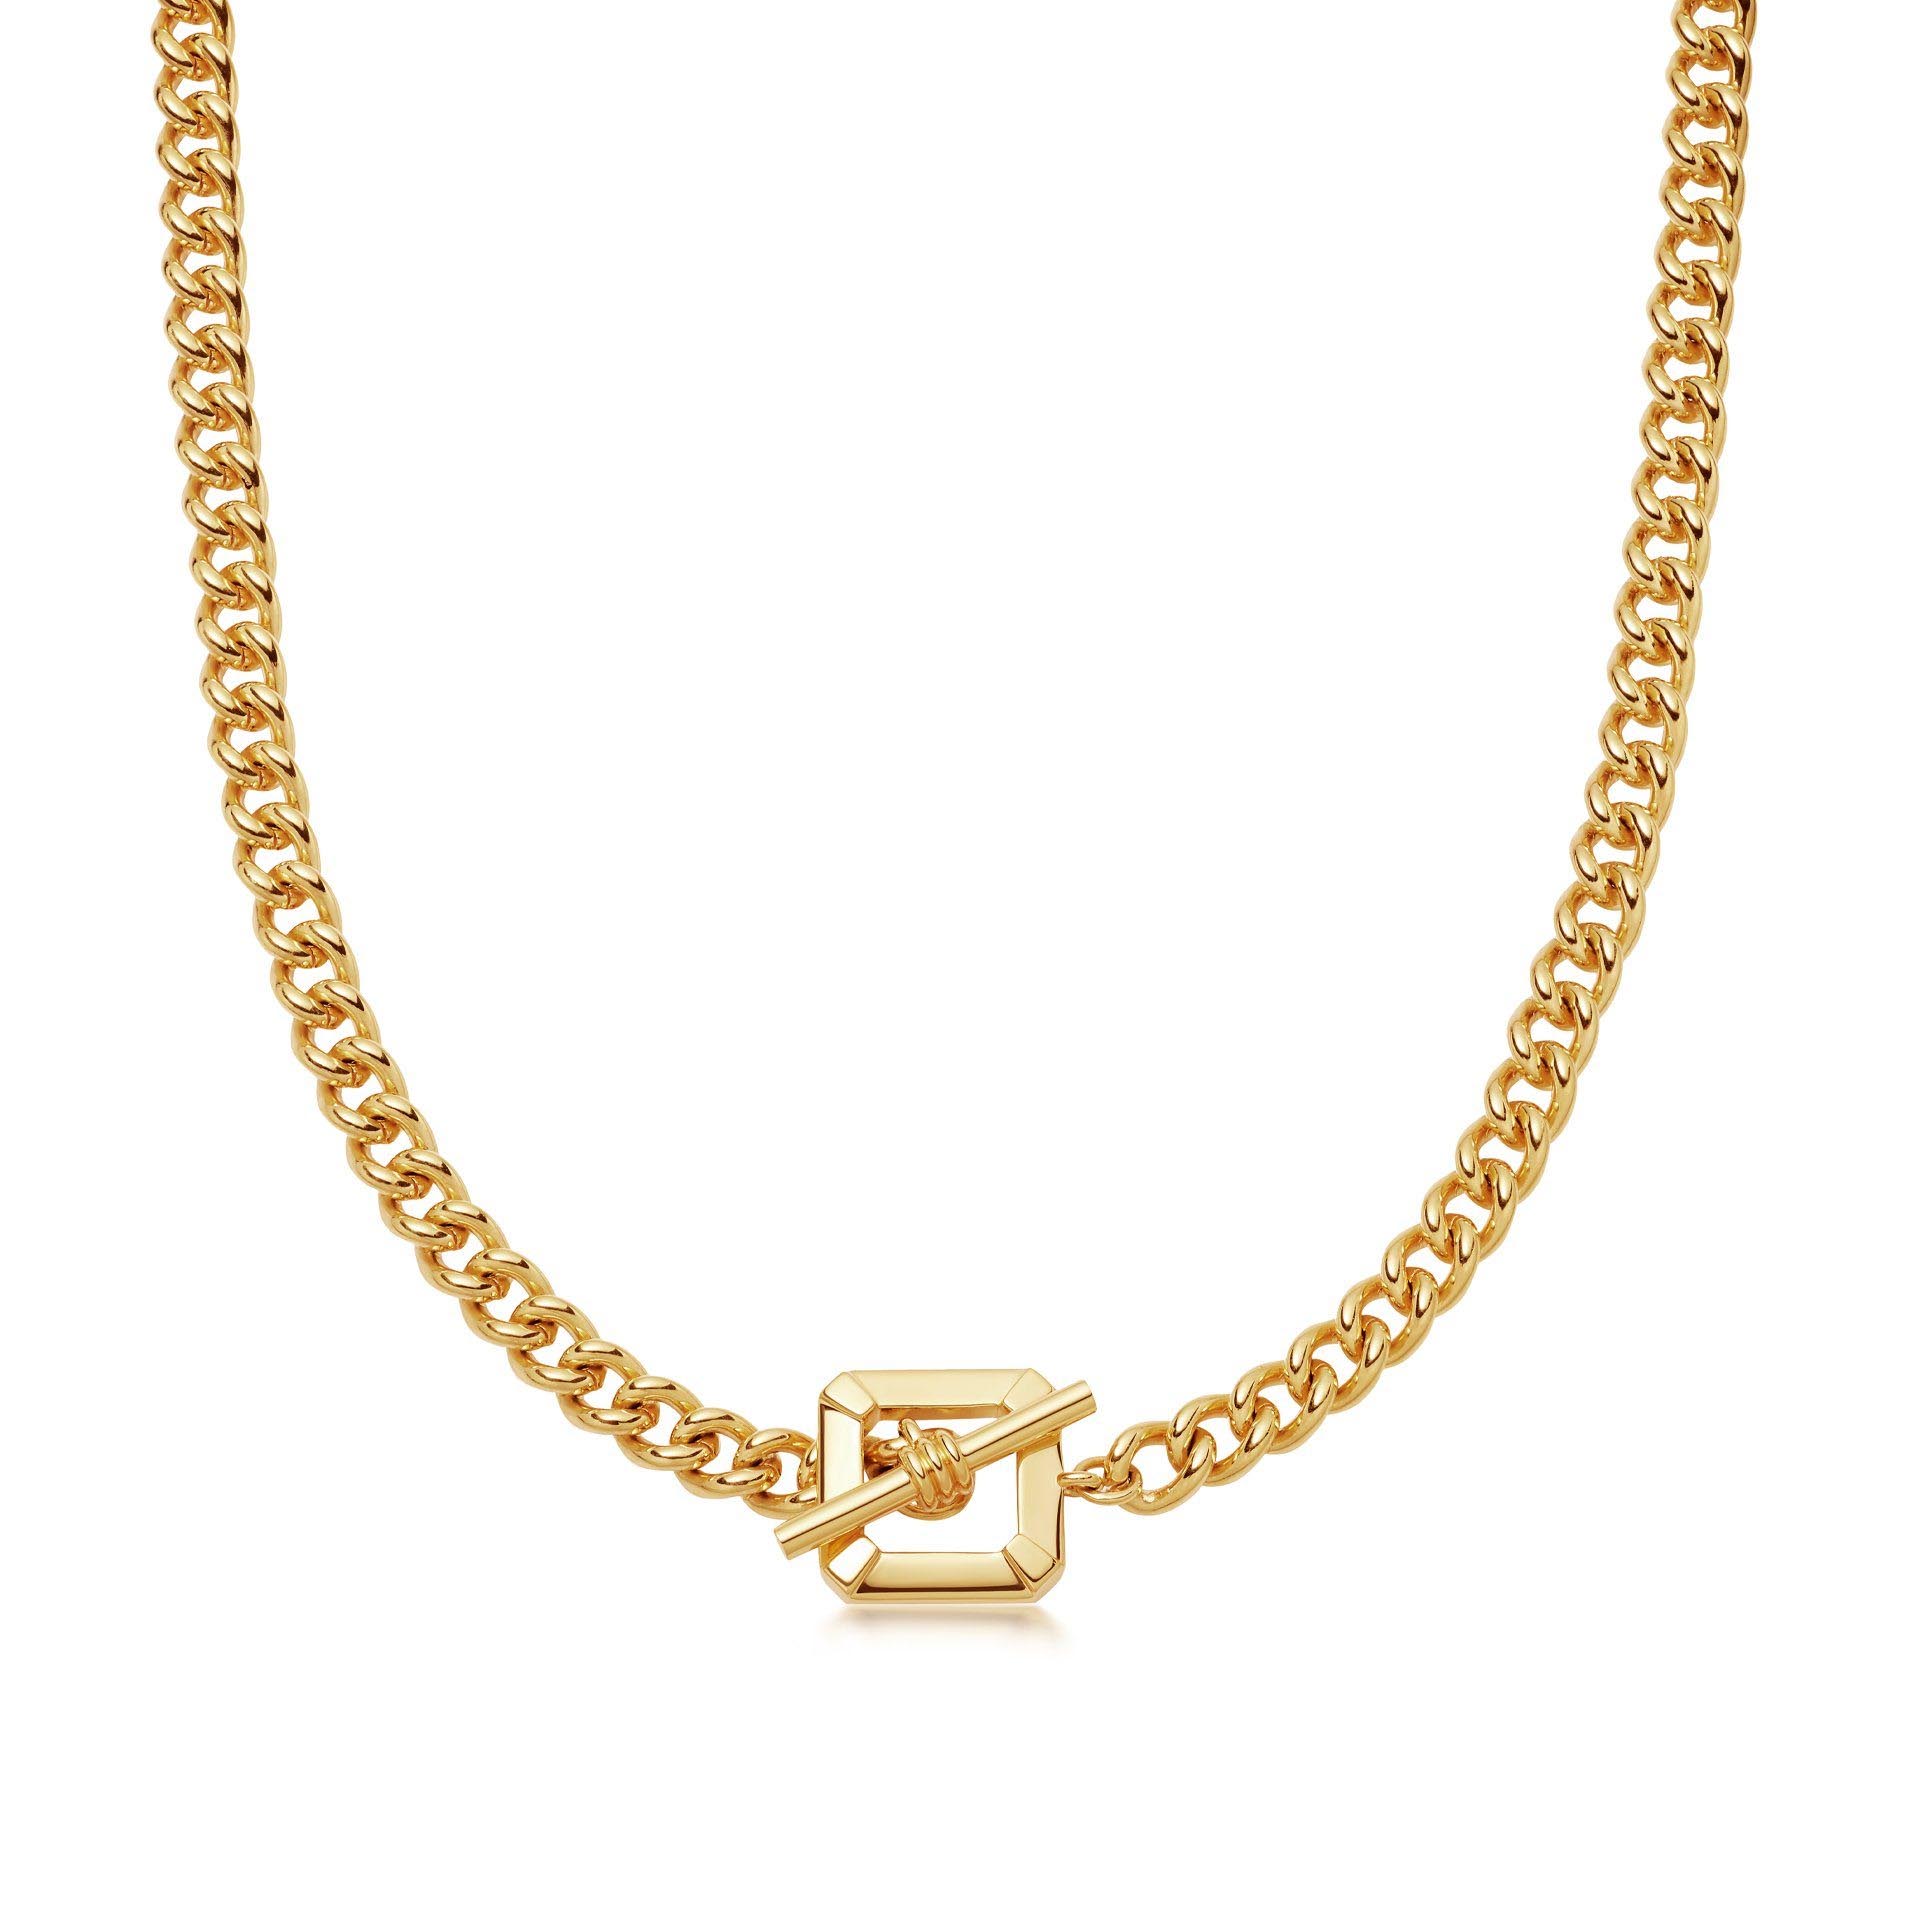 Wholesale OEM/ODM Jewelry OEM French jewelry necklace in 18ct Gold Plated on Brass or sterling silver